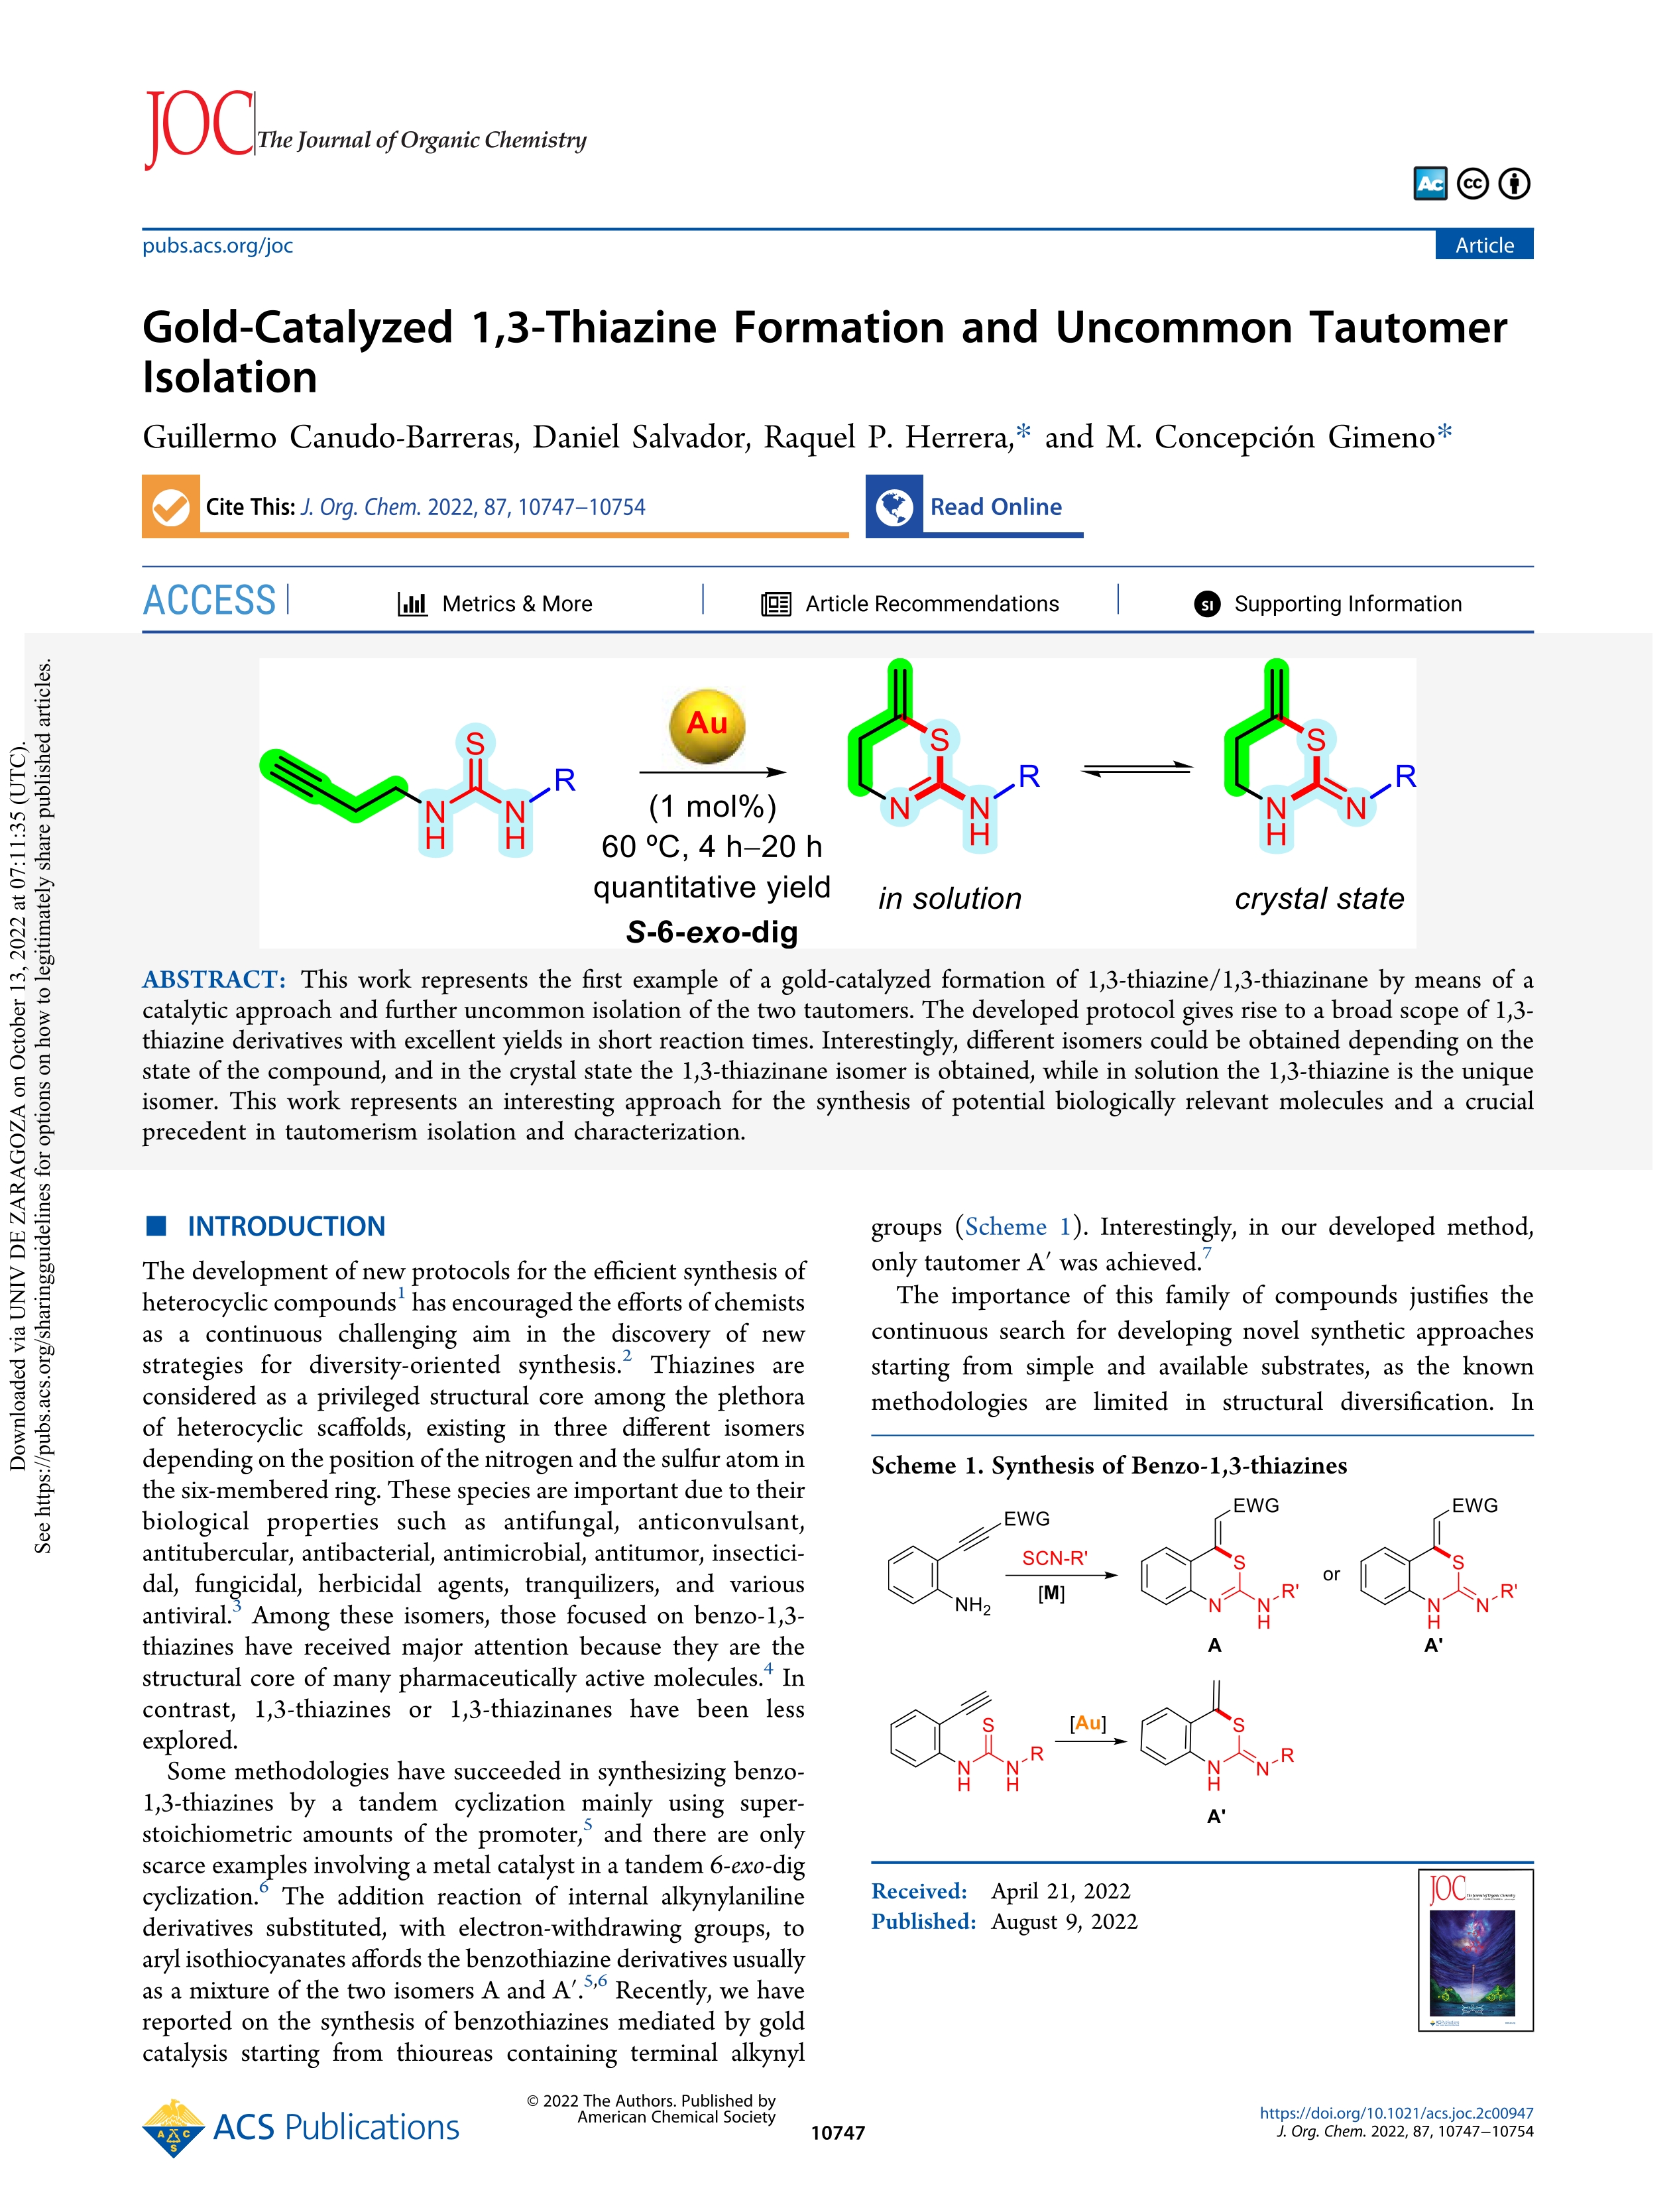 Gold-catalyzed 1, 3-Thiazine formation and uncommon tautomer isolation